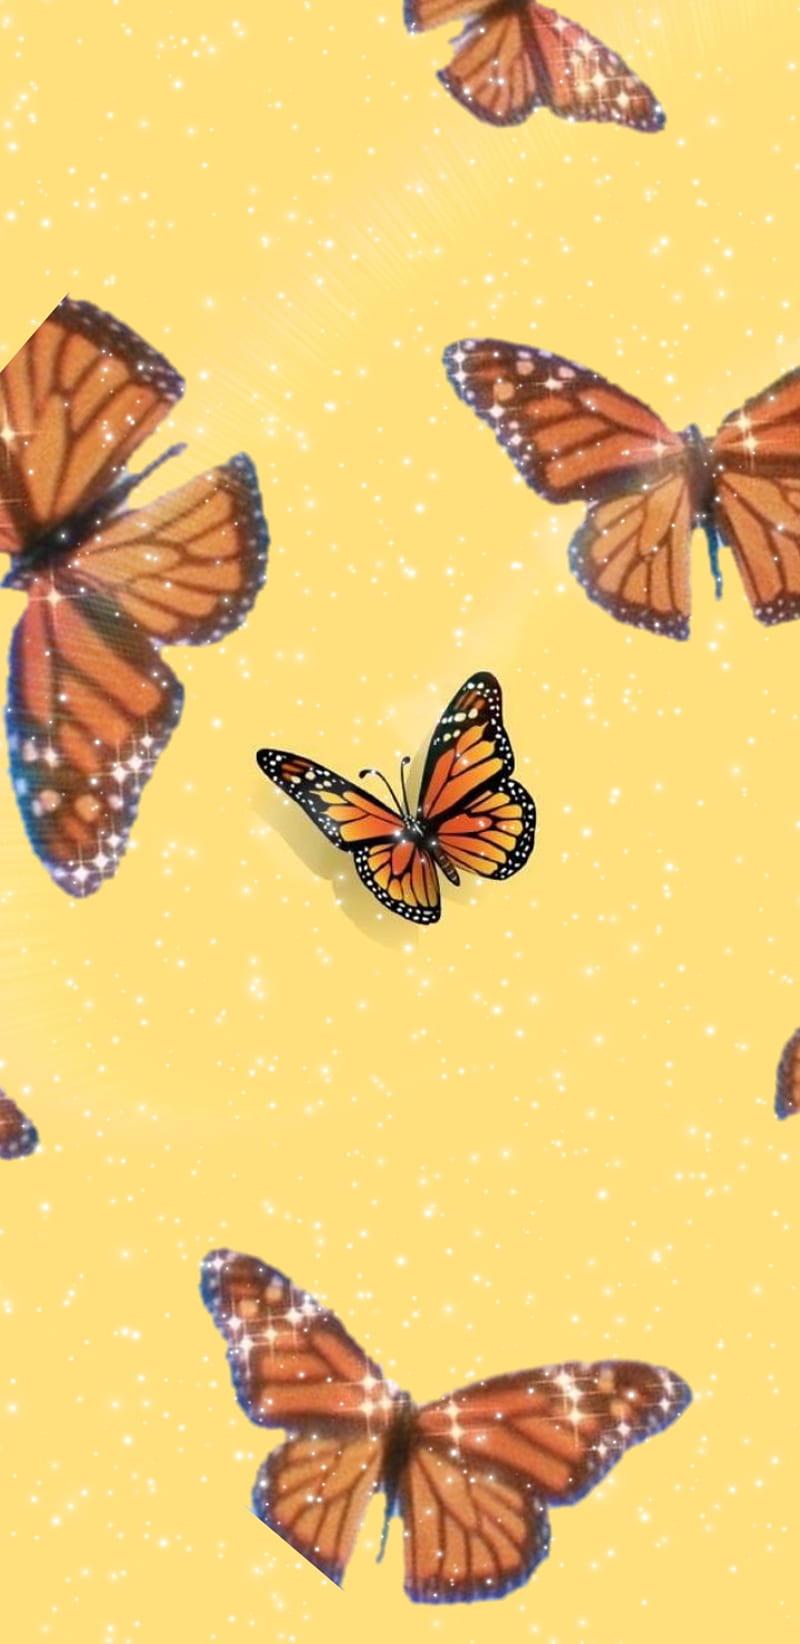 A pattern of butterflies on yellow background - Butterfly